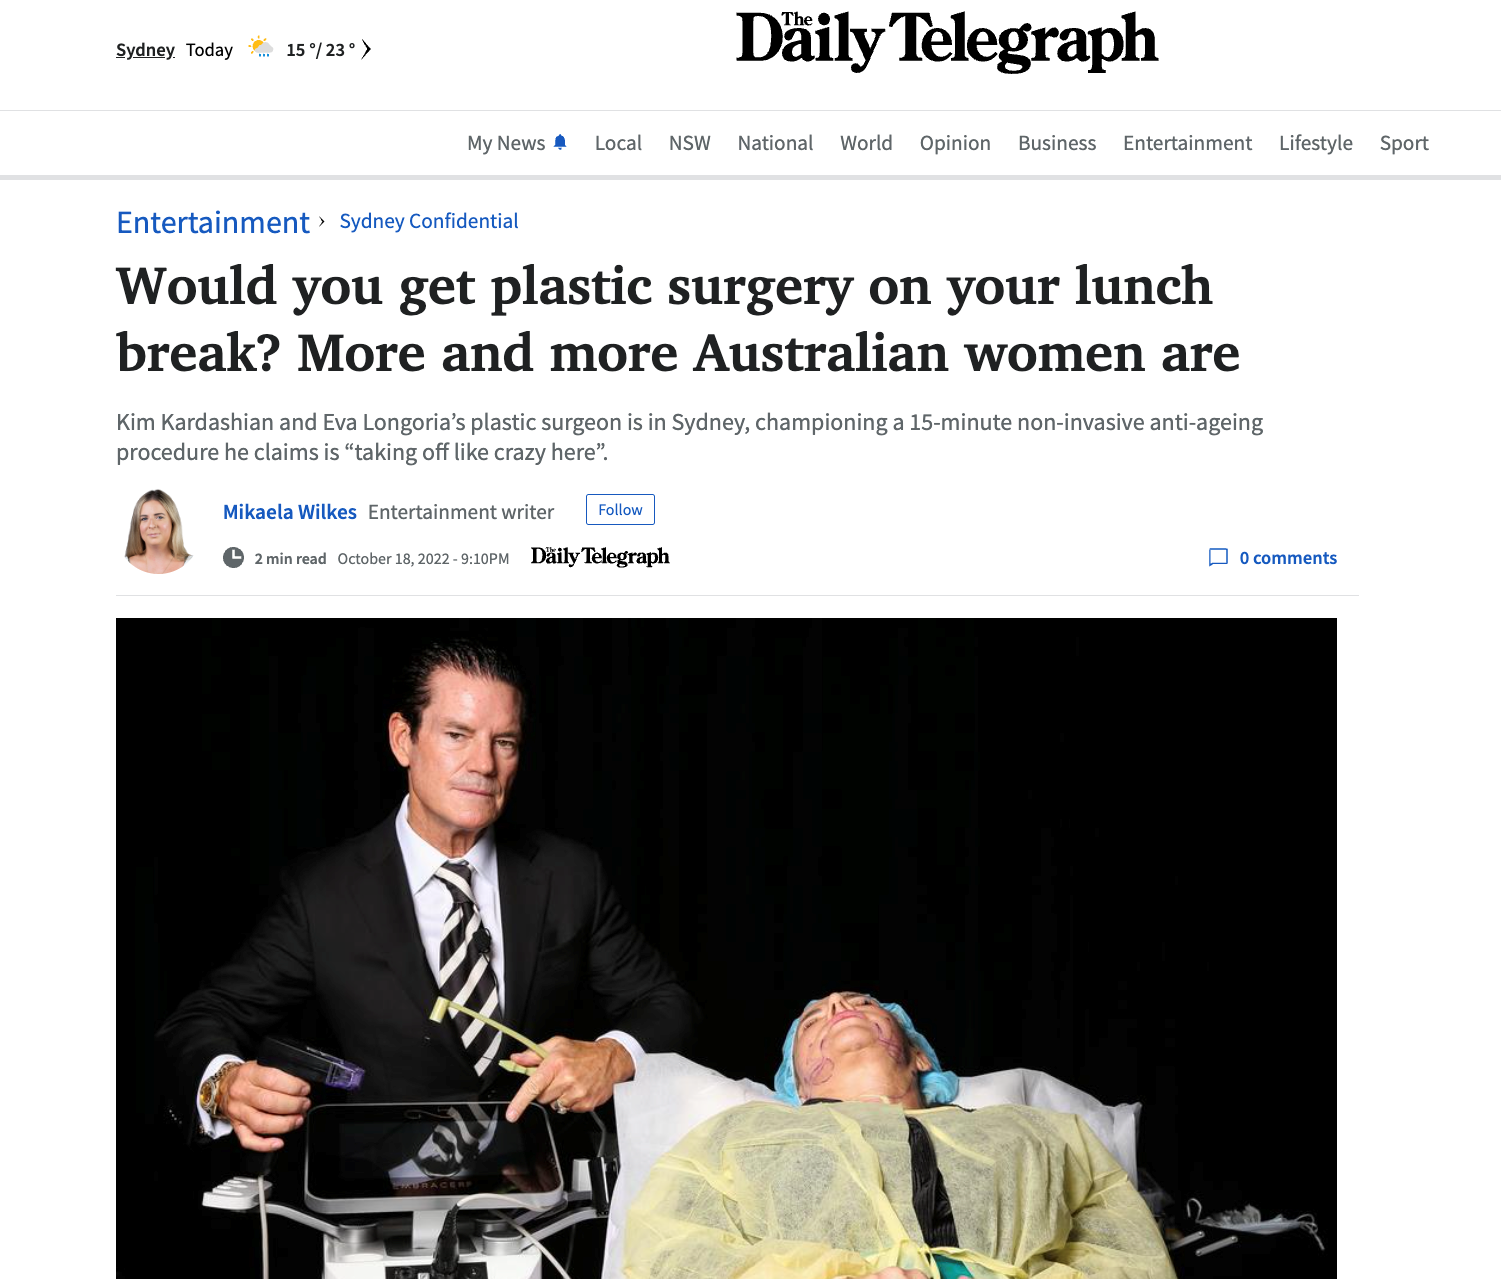 Daily Telegraph - Would you get plastic surgery on your lunch break? More and more Australian women are